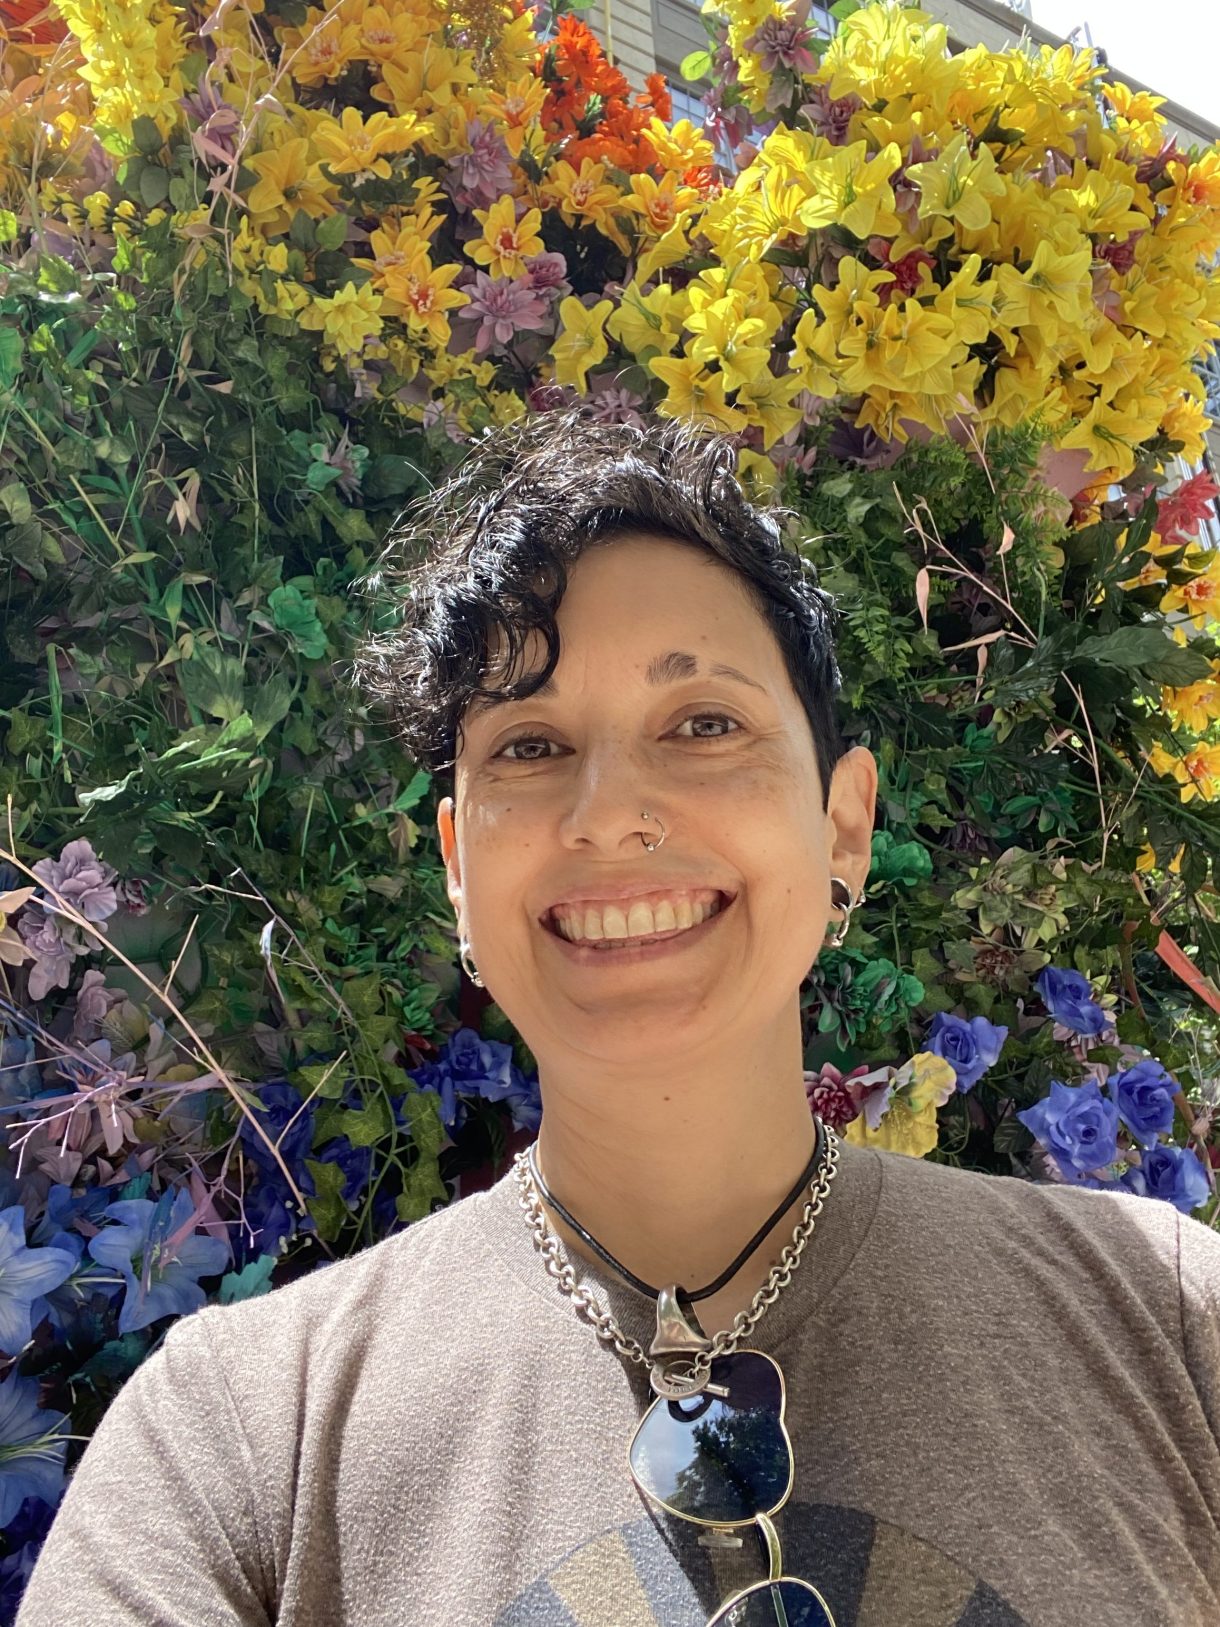 Tracy is here against a background of flowers. Tracy is an asian woman with curly dark hair, wearing a few necklaces and a tee shirt with multiple earrings, a big smile and a slit in her eyebrow.